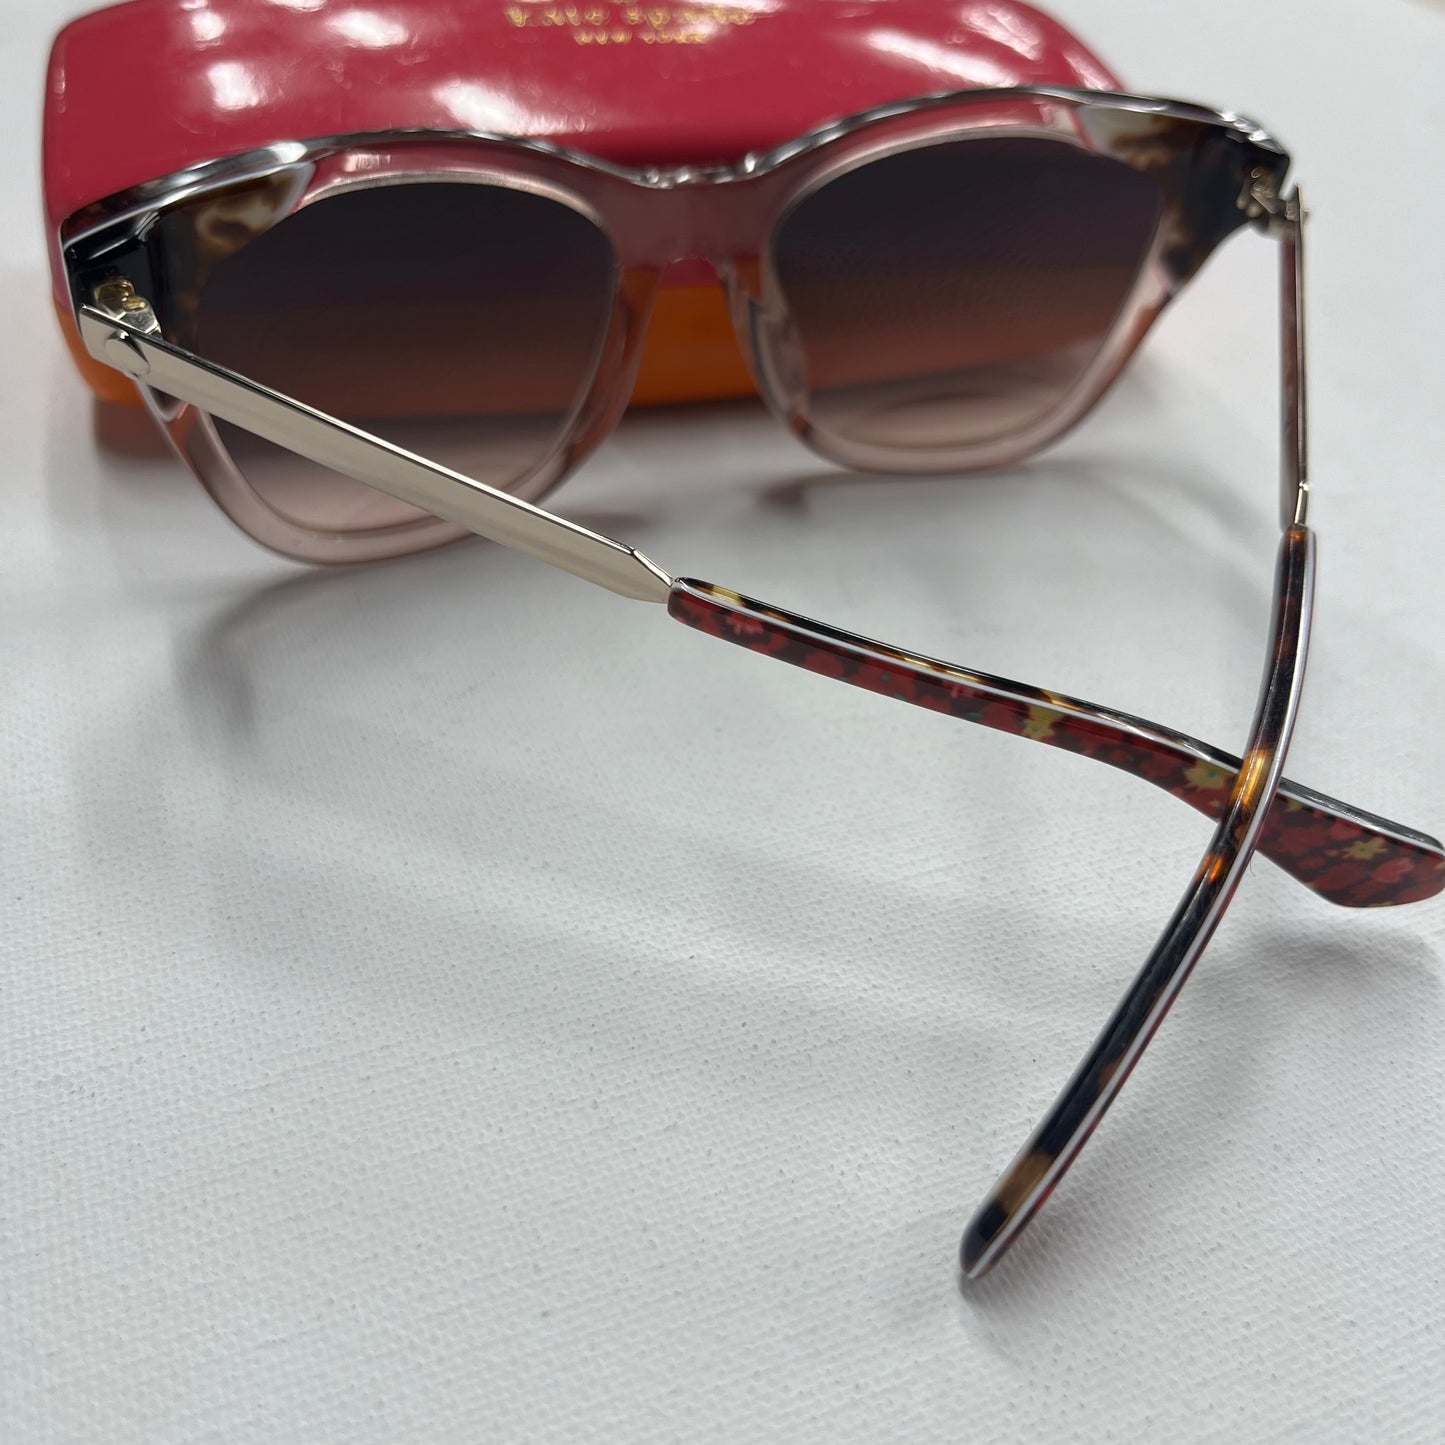 Sunglasses By Kate Spade  Size: 01 Piece